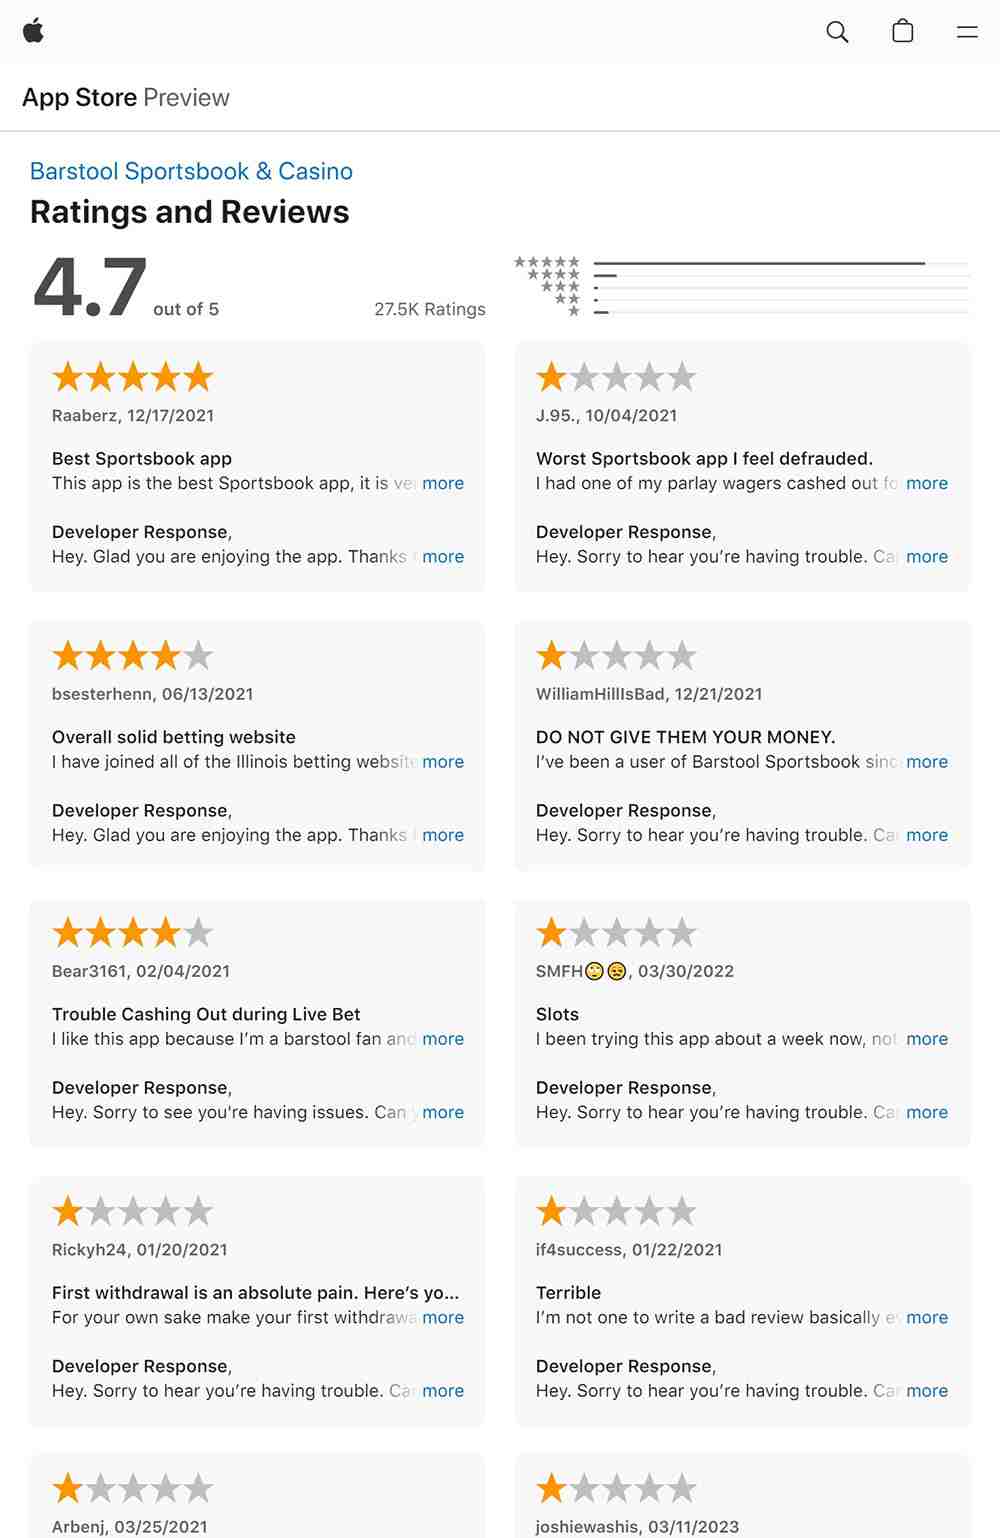 Apple App store ratings and reviews for the Barstool MI